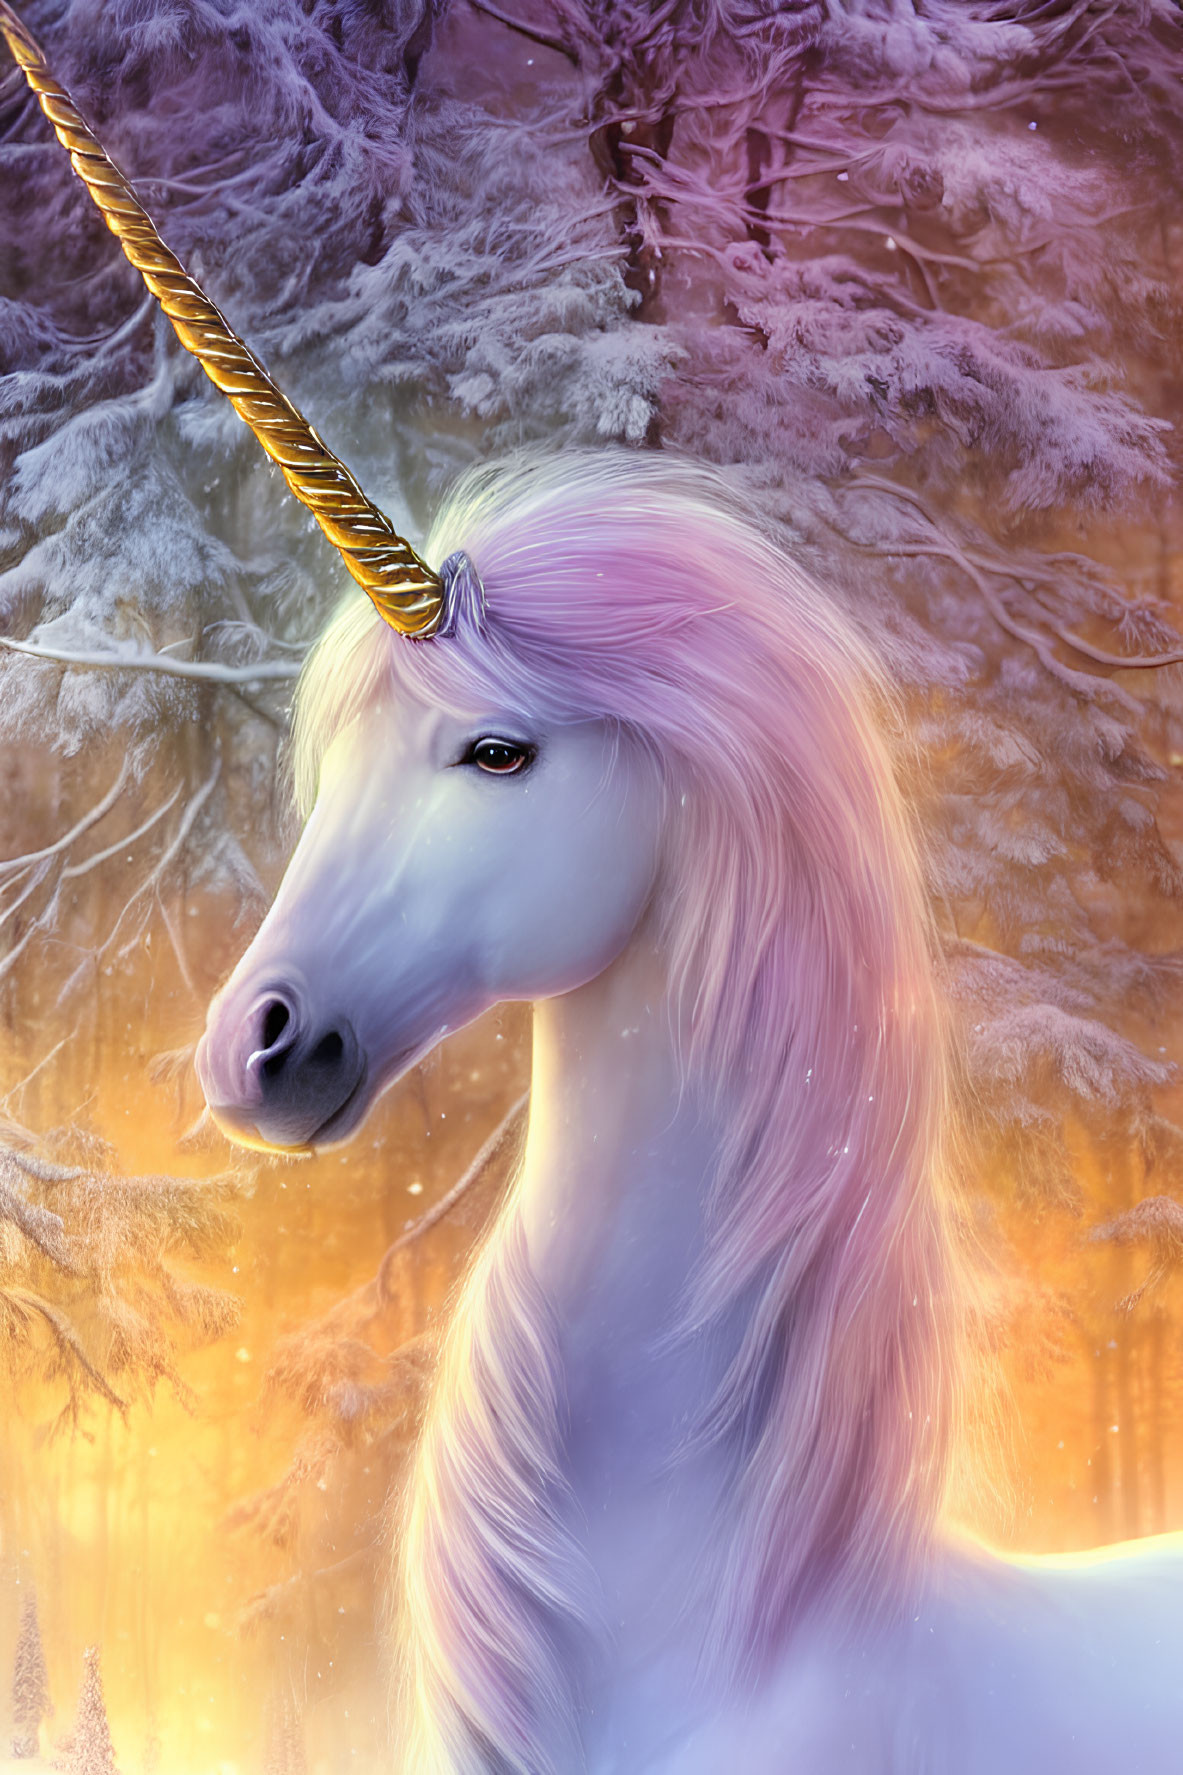 Majestic unicorn with golden horn in frosty forest landscape